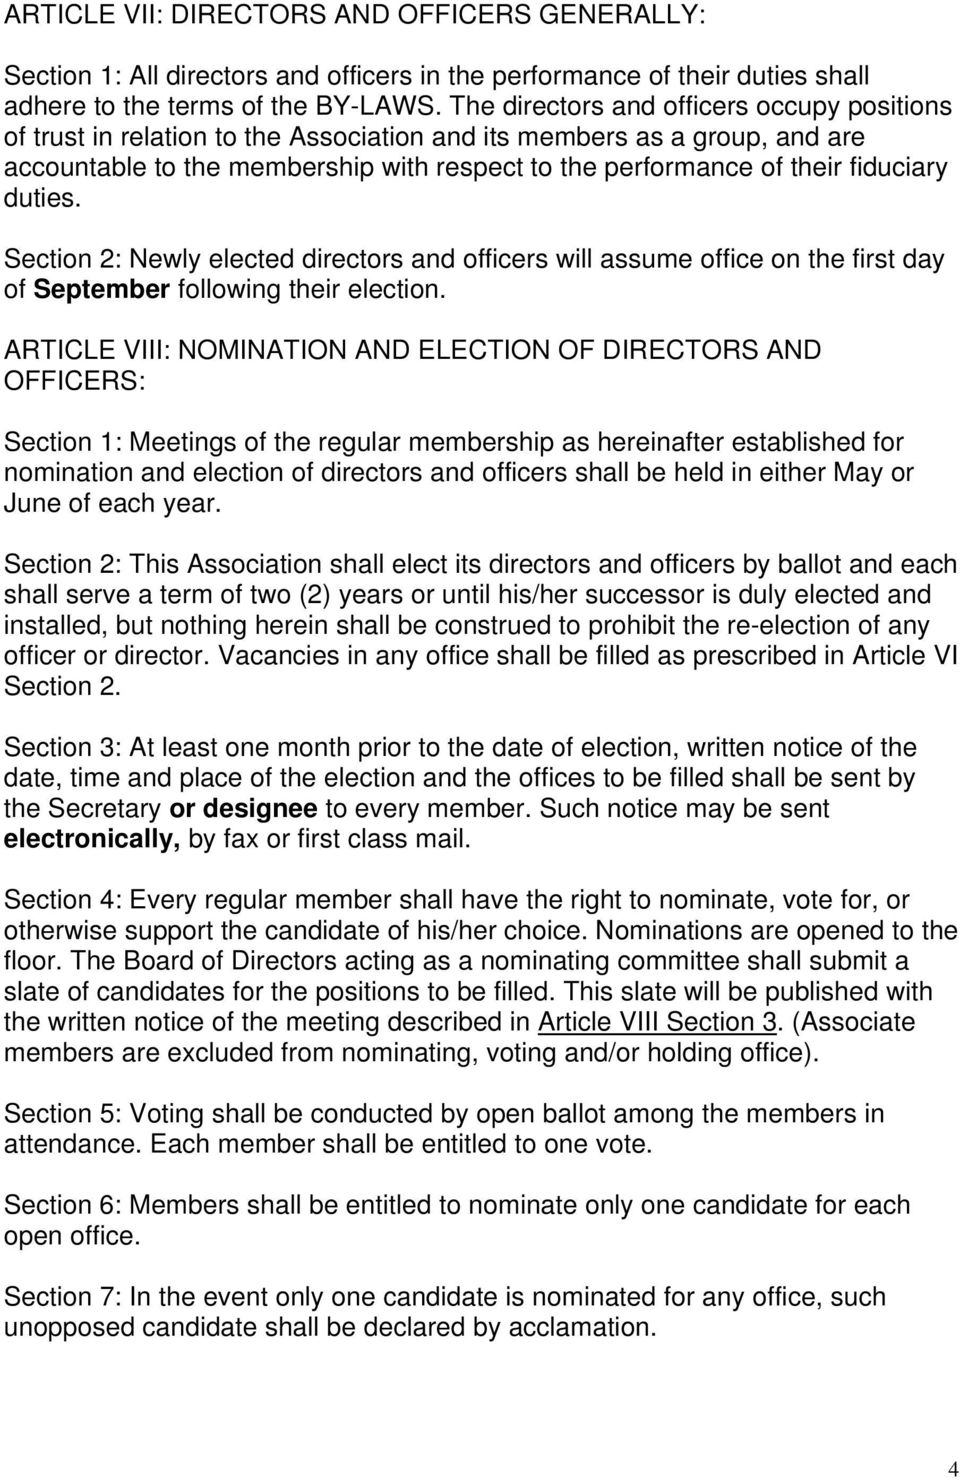 fiduciary duties. Section 2: Newly elected directors and officers will assume office on the first day of September following their election.